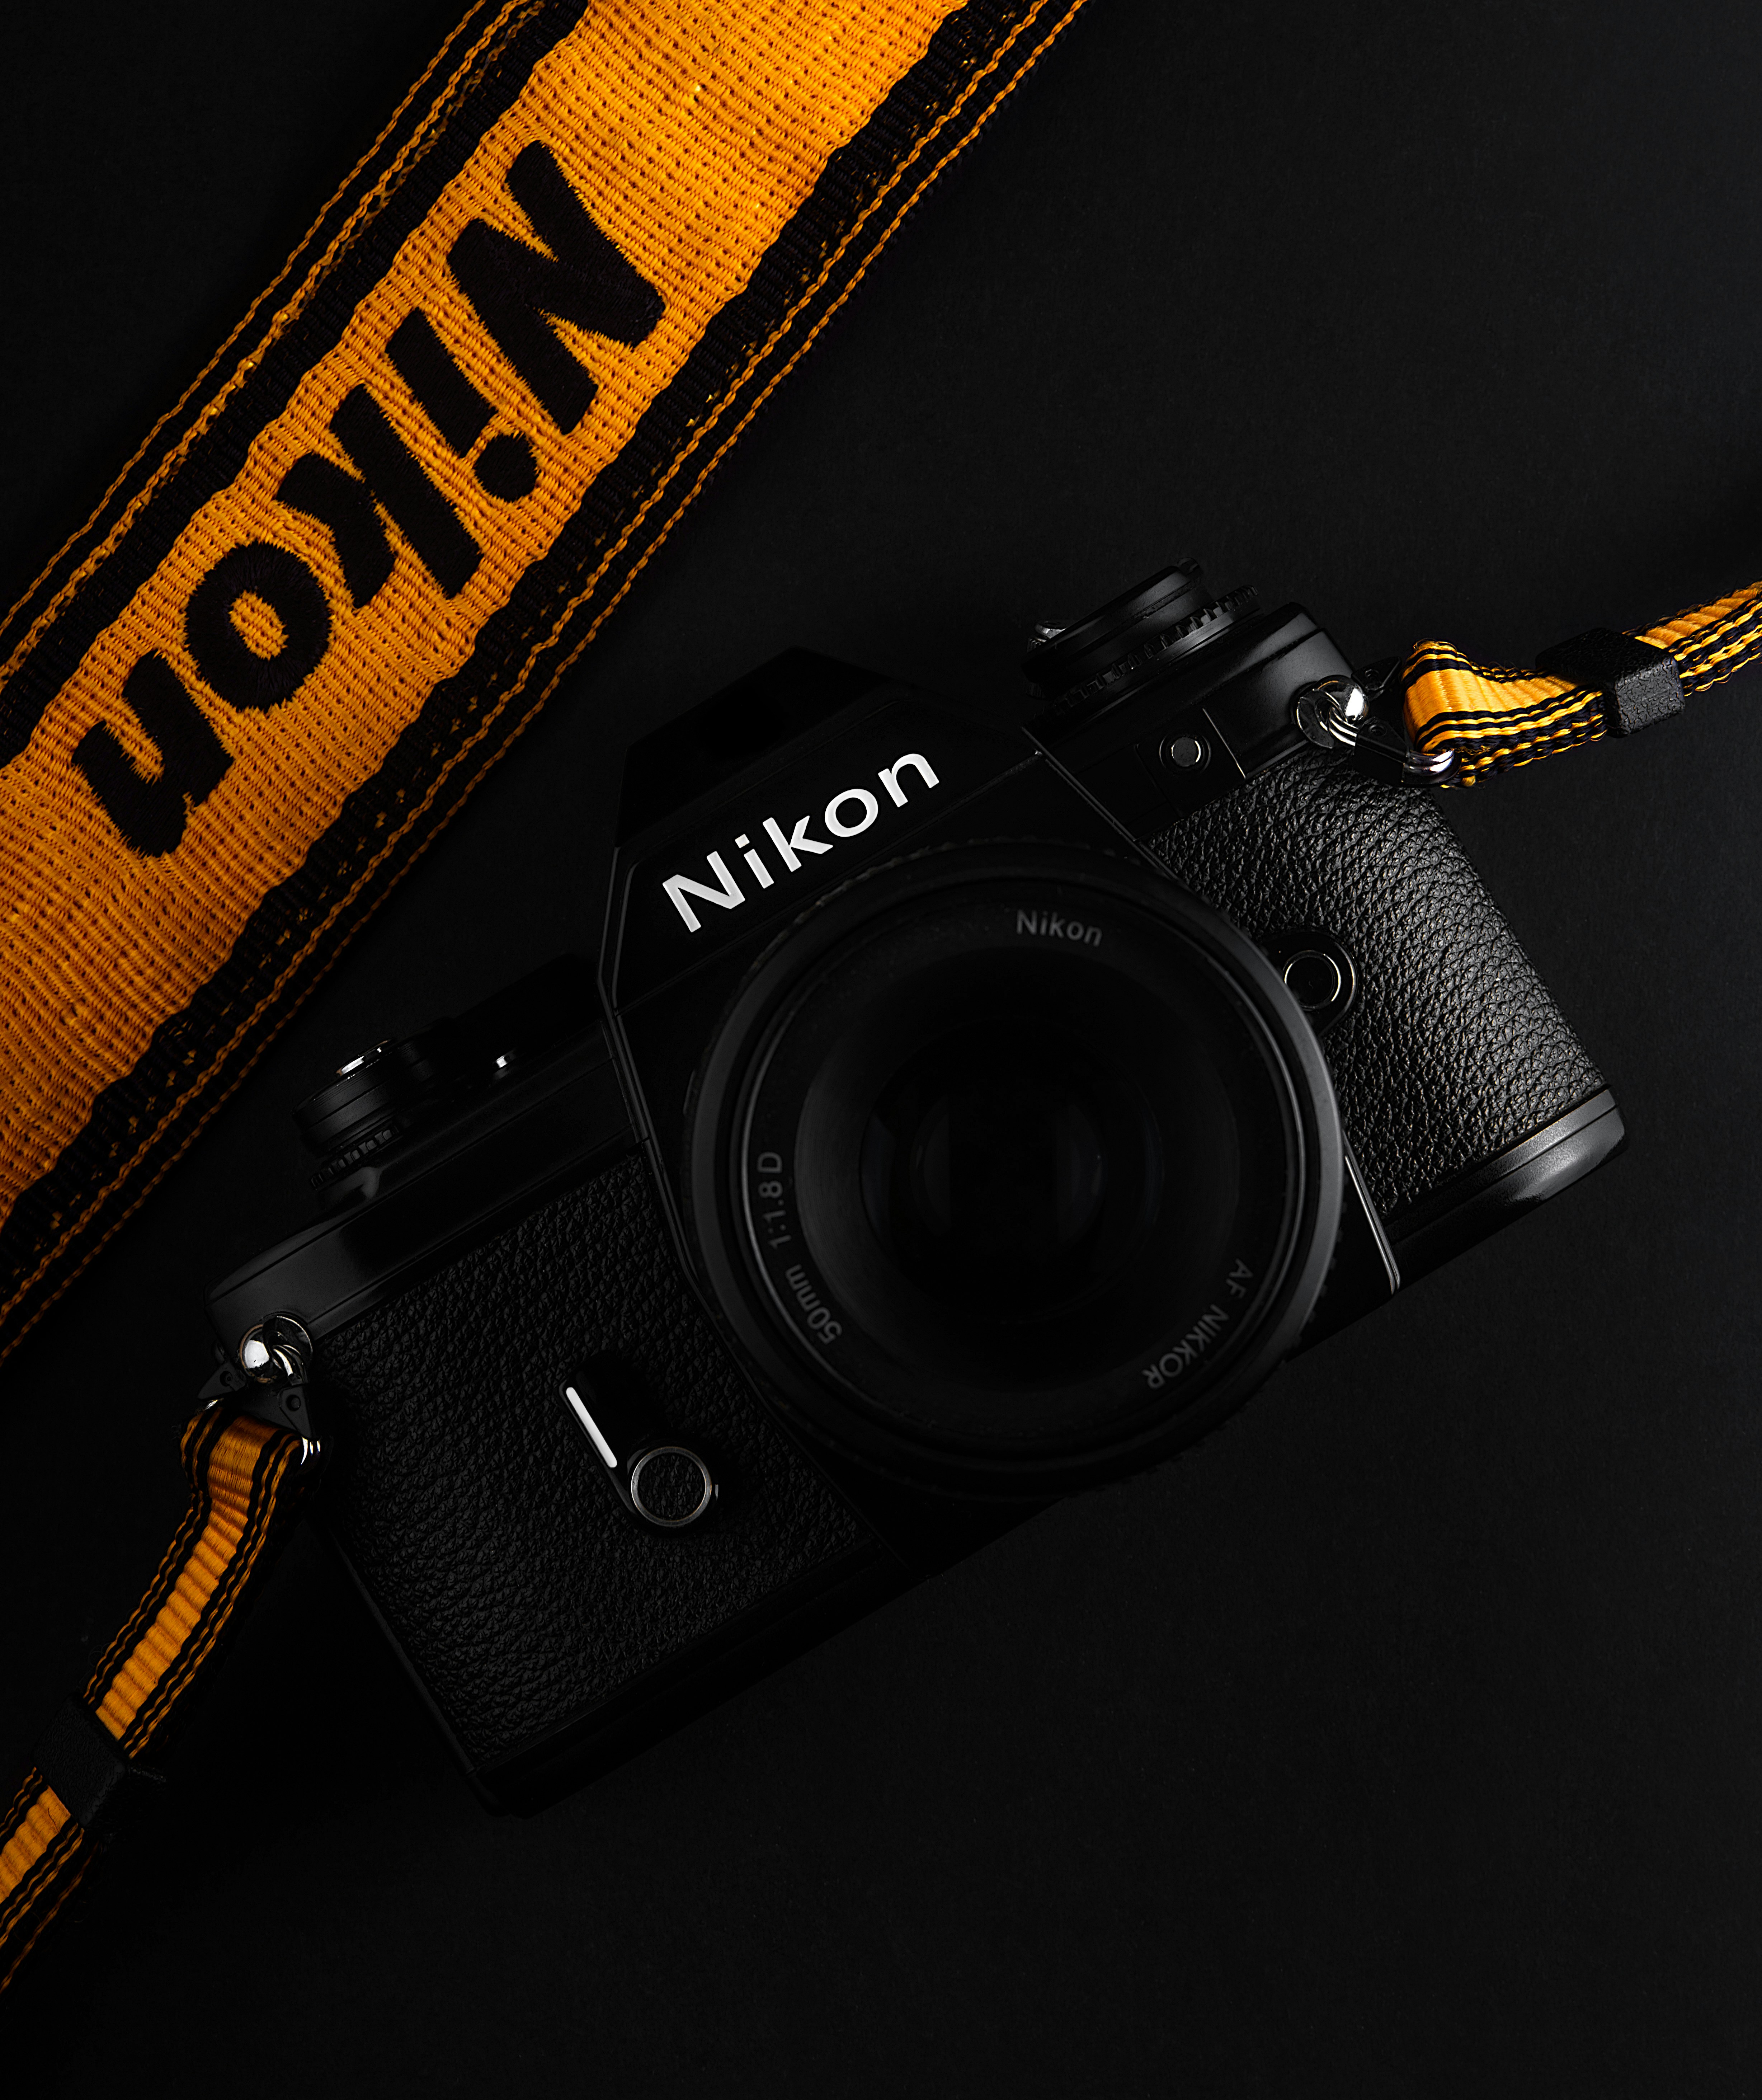 A nikon em, introduced in 1979, Is a simple nikon f mount SLR camera. I was designed to be marketed to the growing market of new women photographers then entering the SLR buyer’s market.